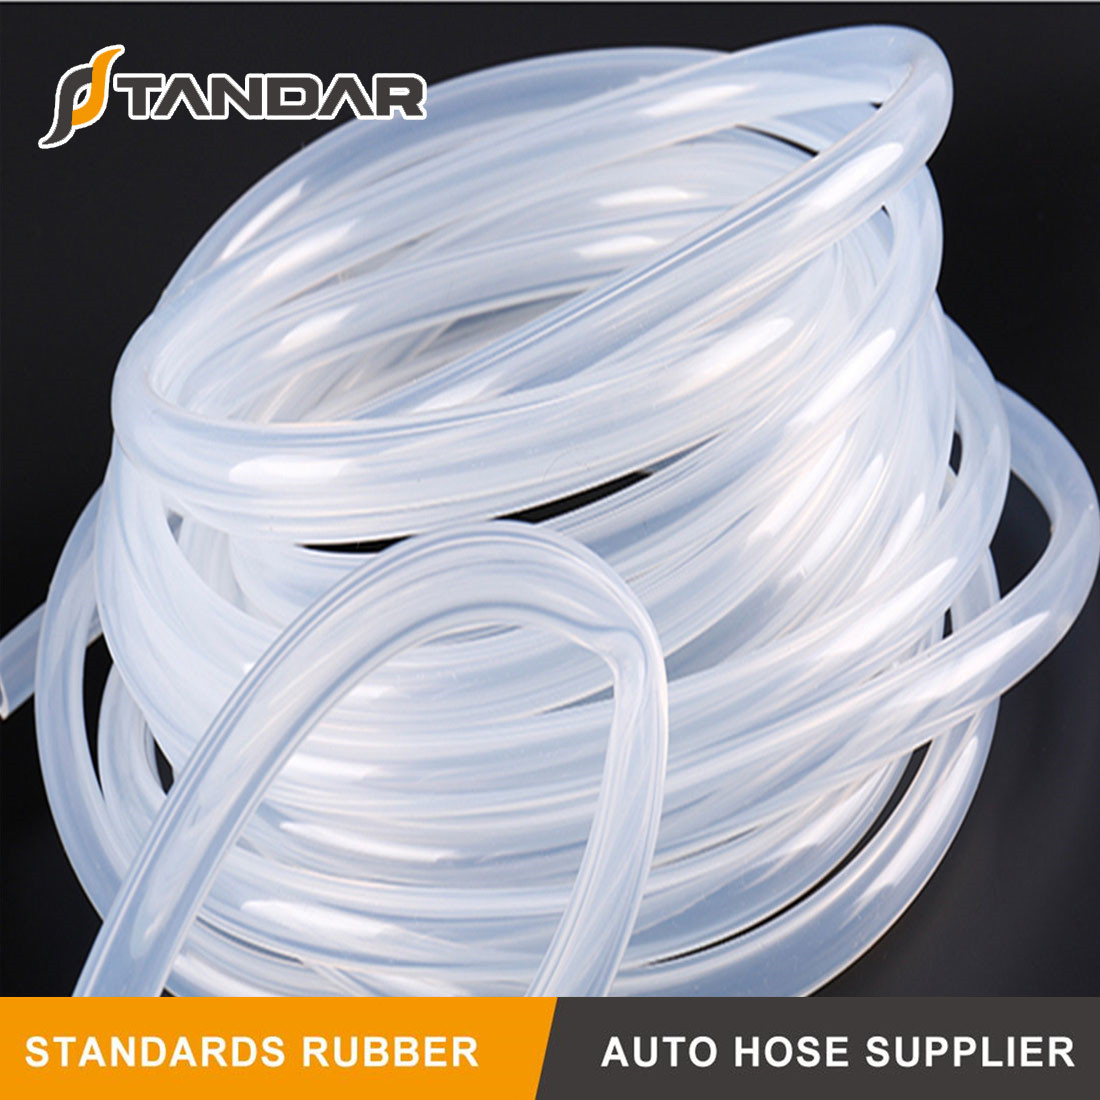 Is the more transparent the medical grade silicone tubing, the better the quality?